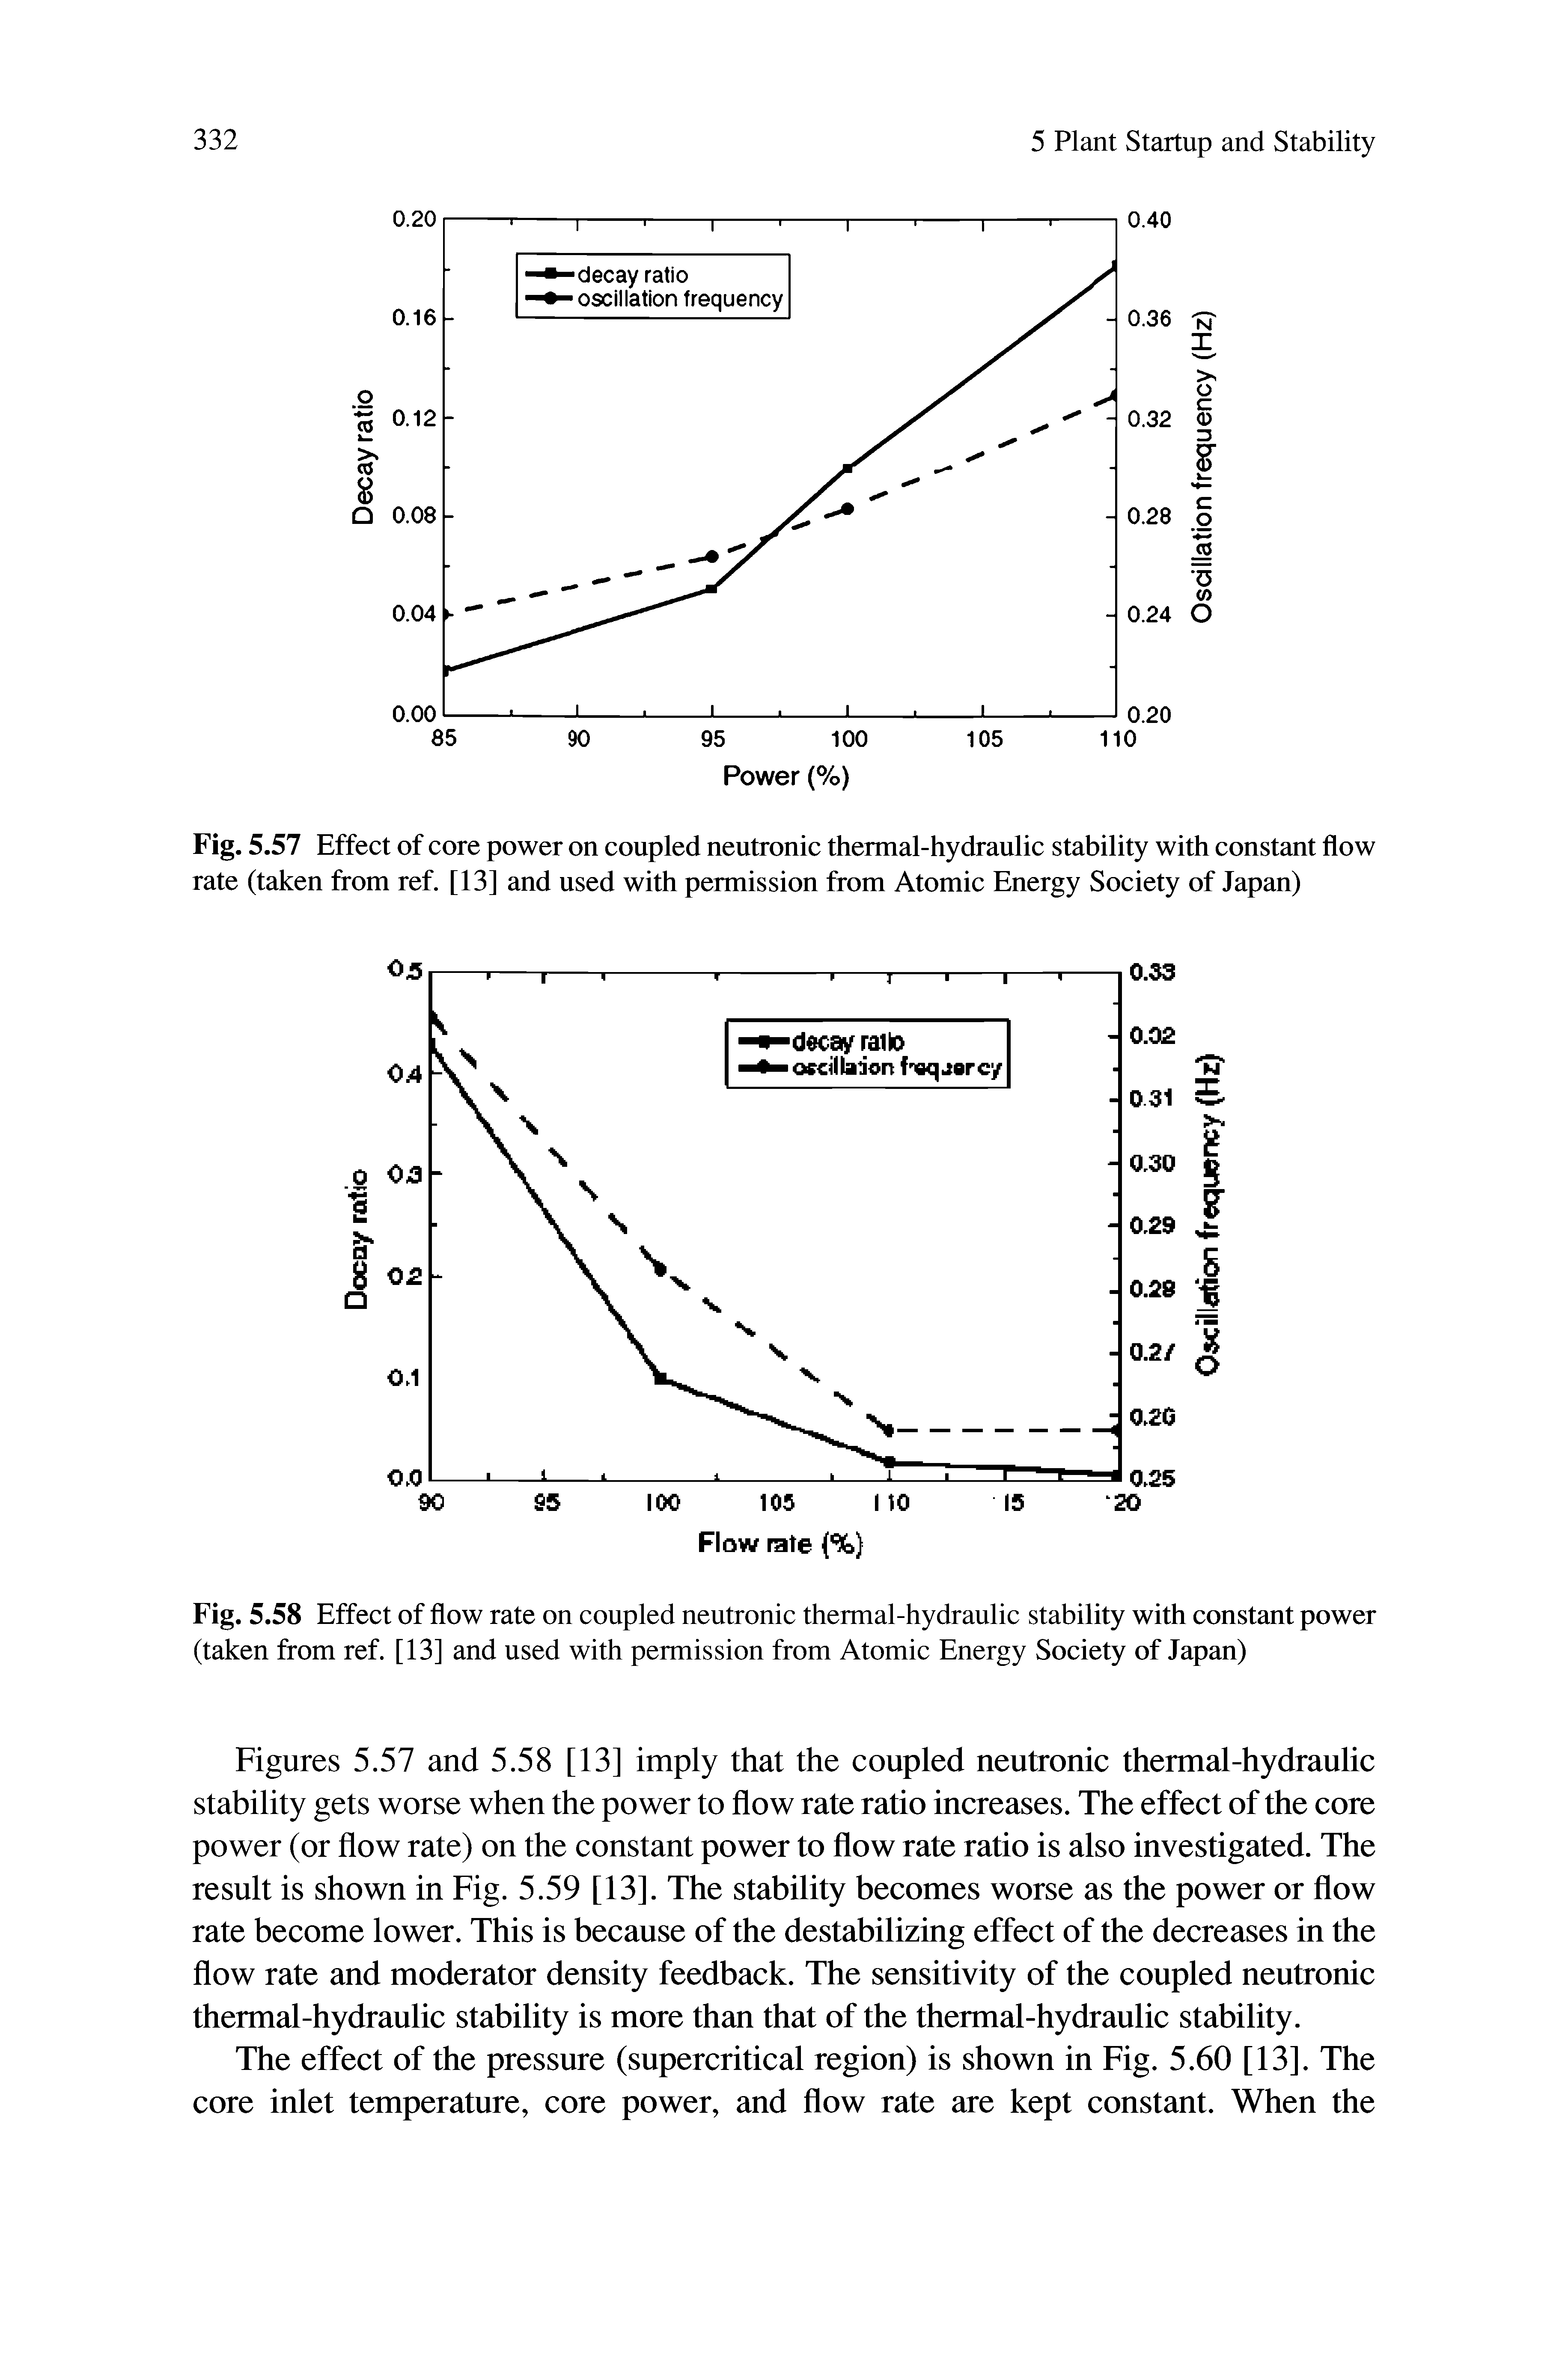 Figures 5.57 and 5.58 [13] imply that the coupled neutronic thermal-hydrauhc stability gets worse when the power to flow rate ratio increases. The effect of the core power (or flow rate) on the constant power to flow rate ratio is also investigated. The result is shown in Fig. 5.59 [13]. The stability becomes worse as the power or flow rate become lower. This is because of the destabilizing effect of the decreases in the flow rate and moderator density feedback. The sensitivity of the coupled neutronic thermal-hydraulic stability is more than that of the thermal-hydraulic stability.